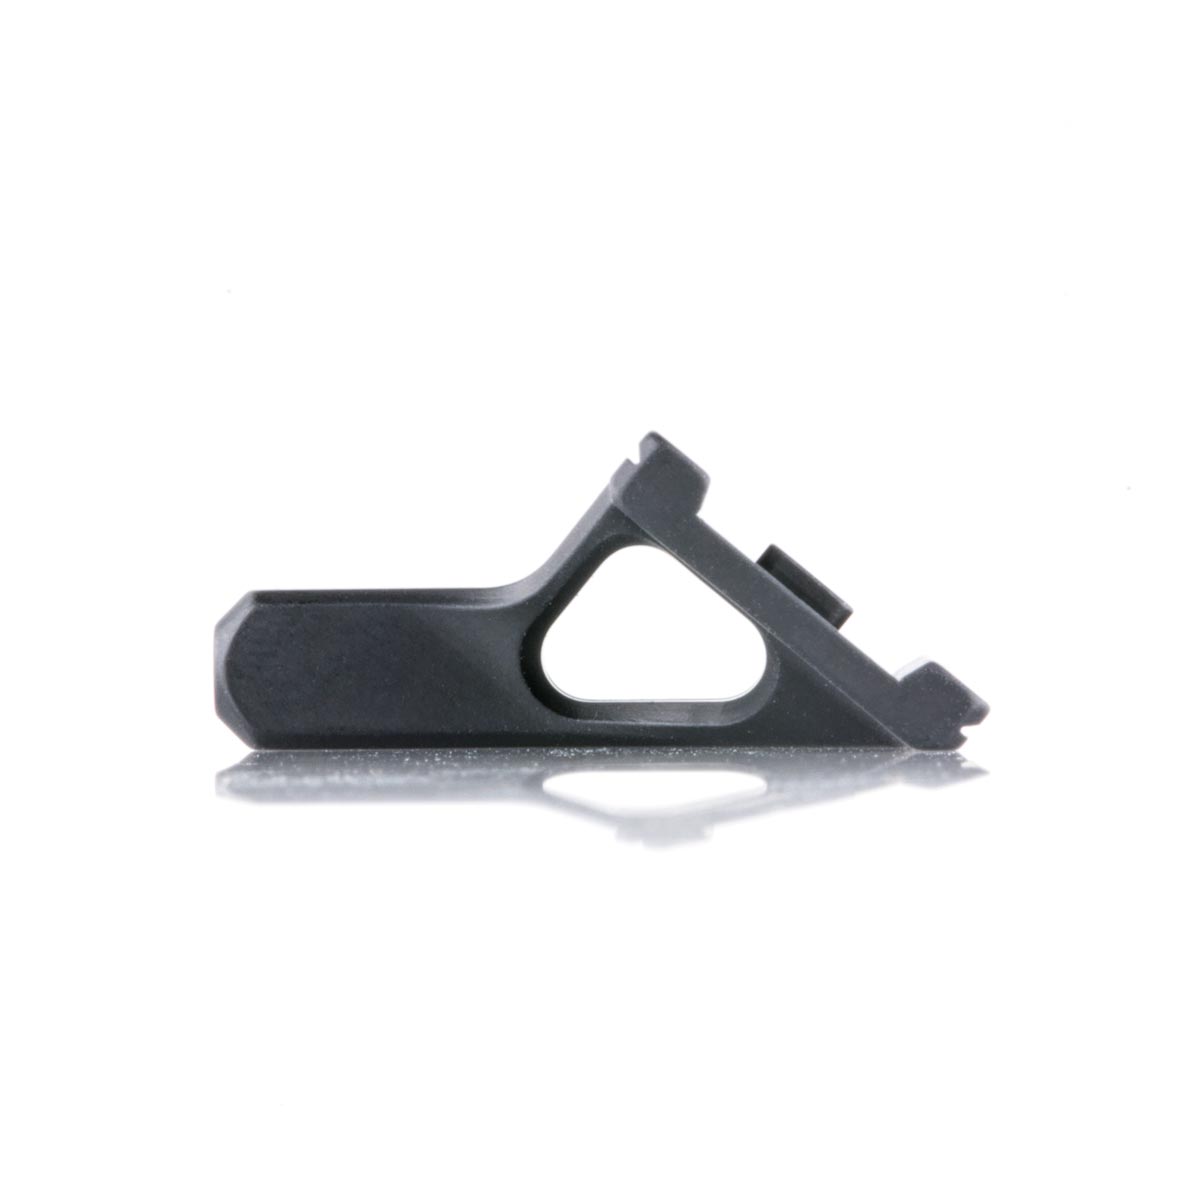 Scalarworks KICK/04 Right Hand Micro Offset Mount Mk2 for Aimpoint ...